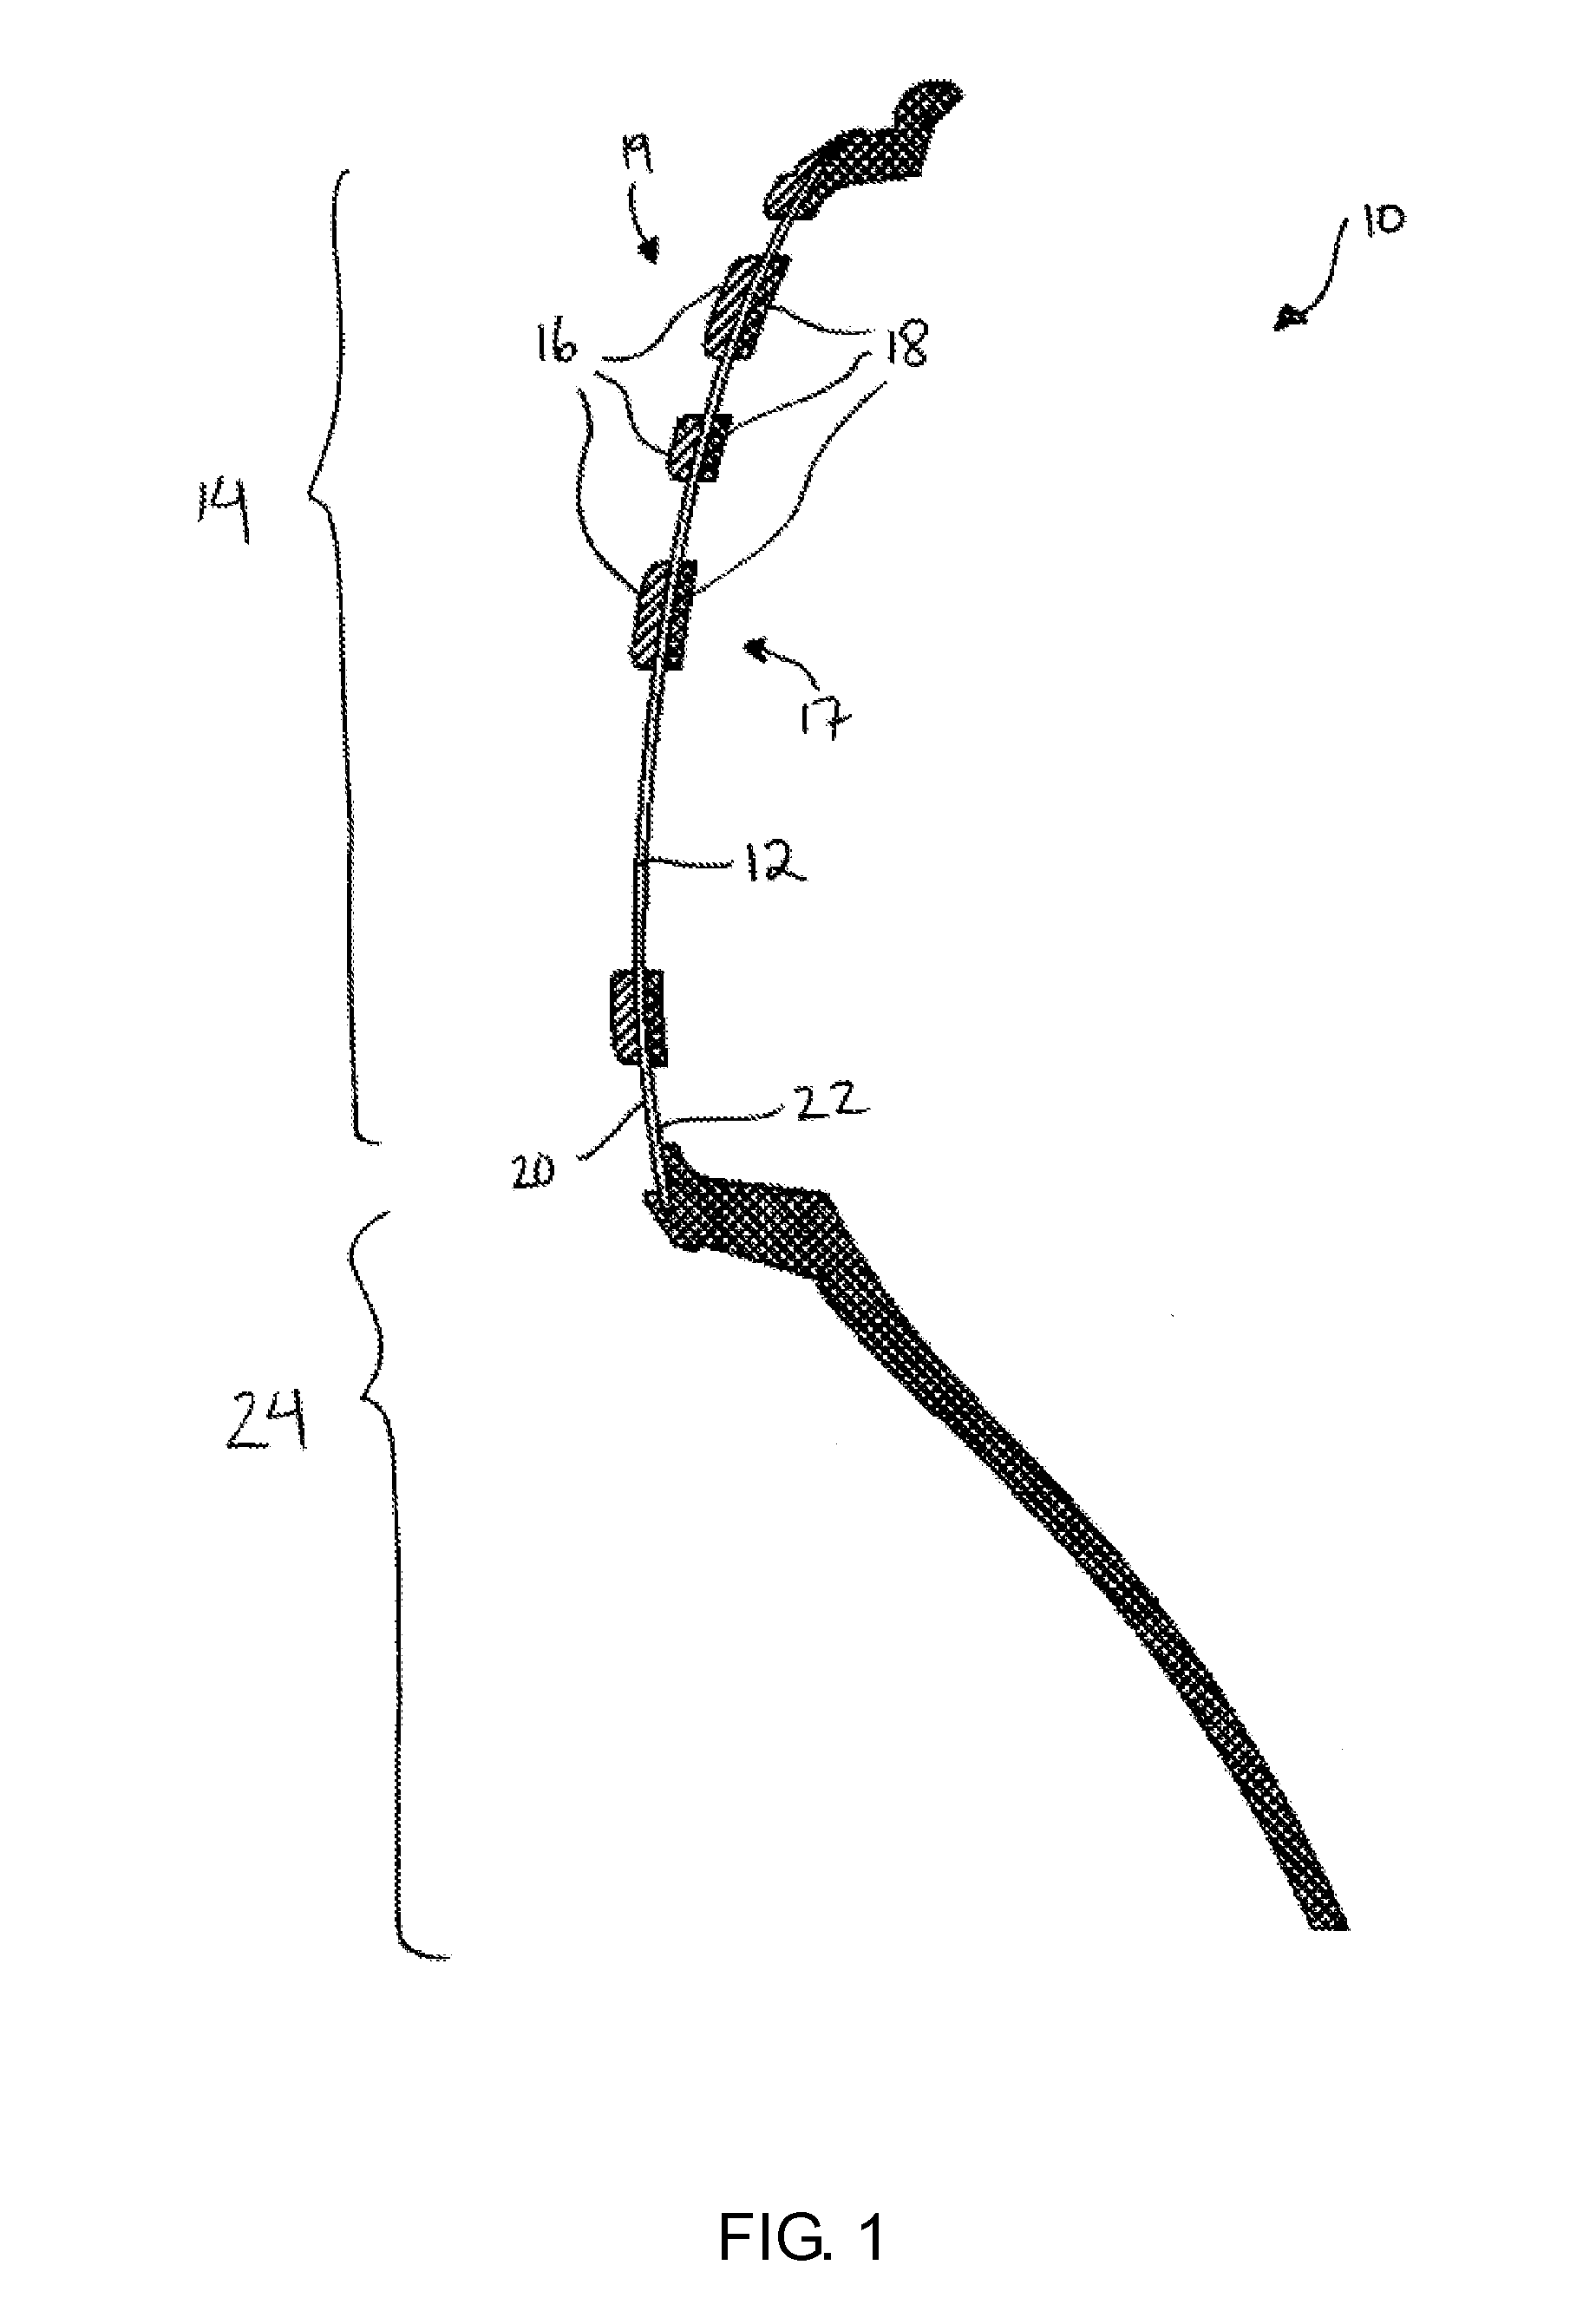 Method for fabricating a footwear sole